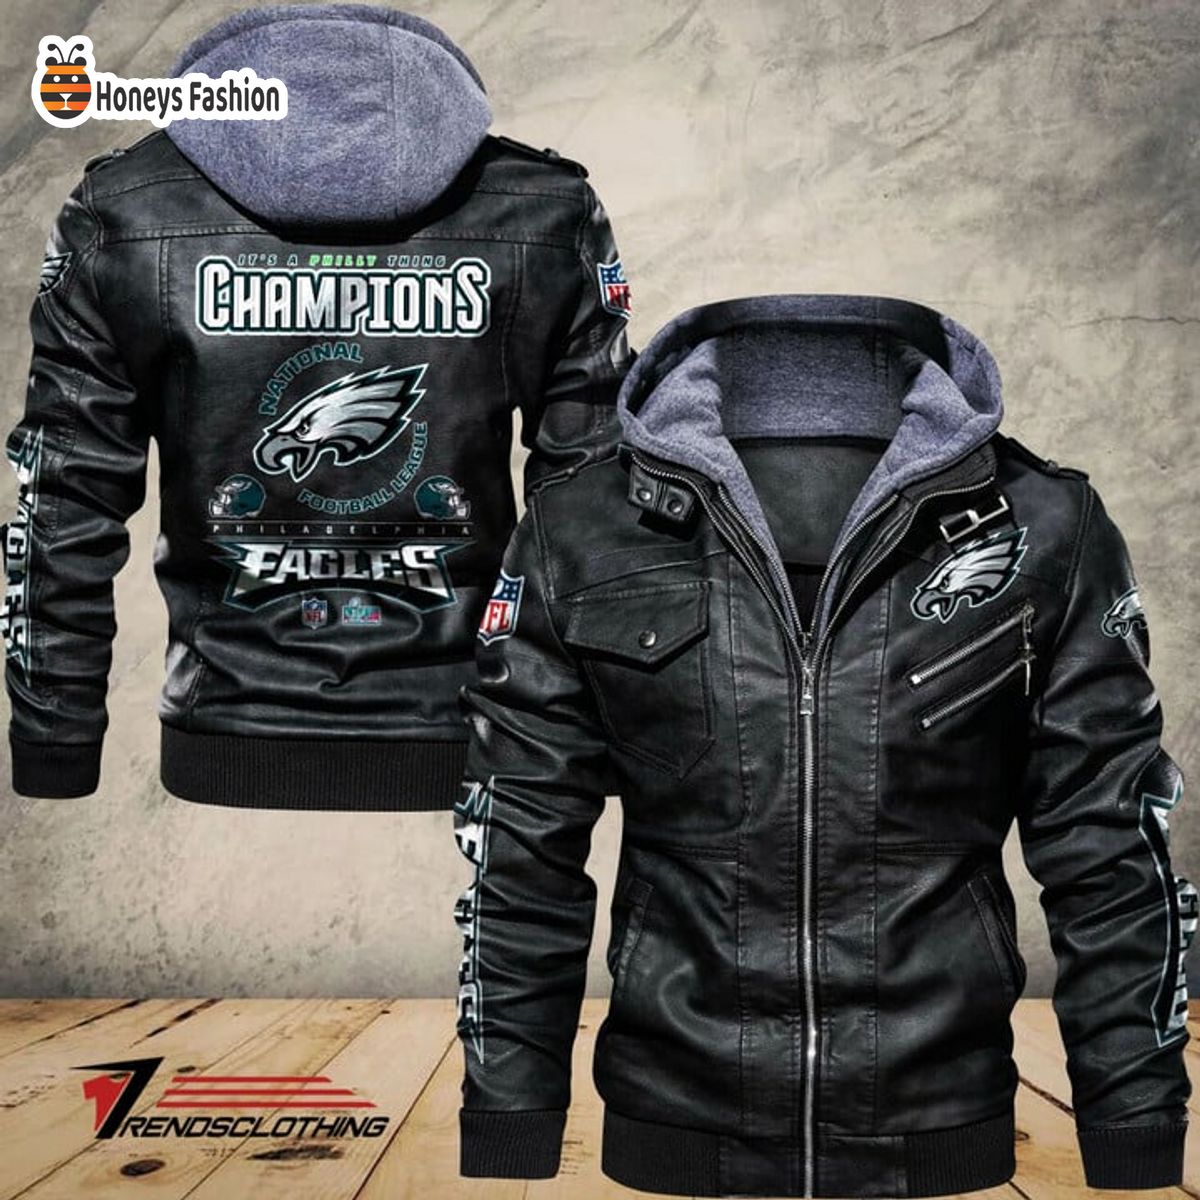 It's a philly thing Champions NFL Philadelphia Eagles leather jacket